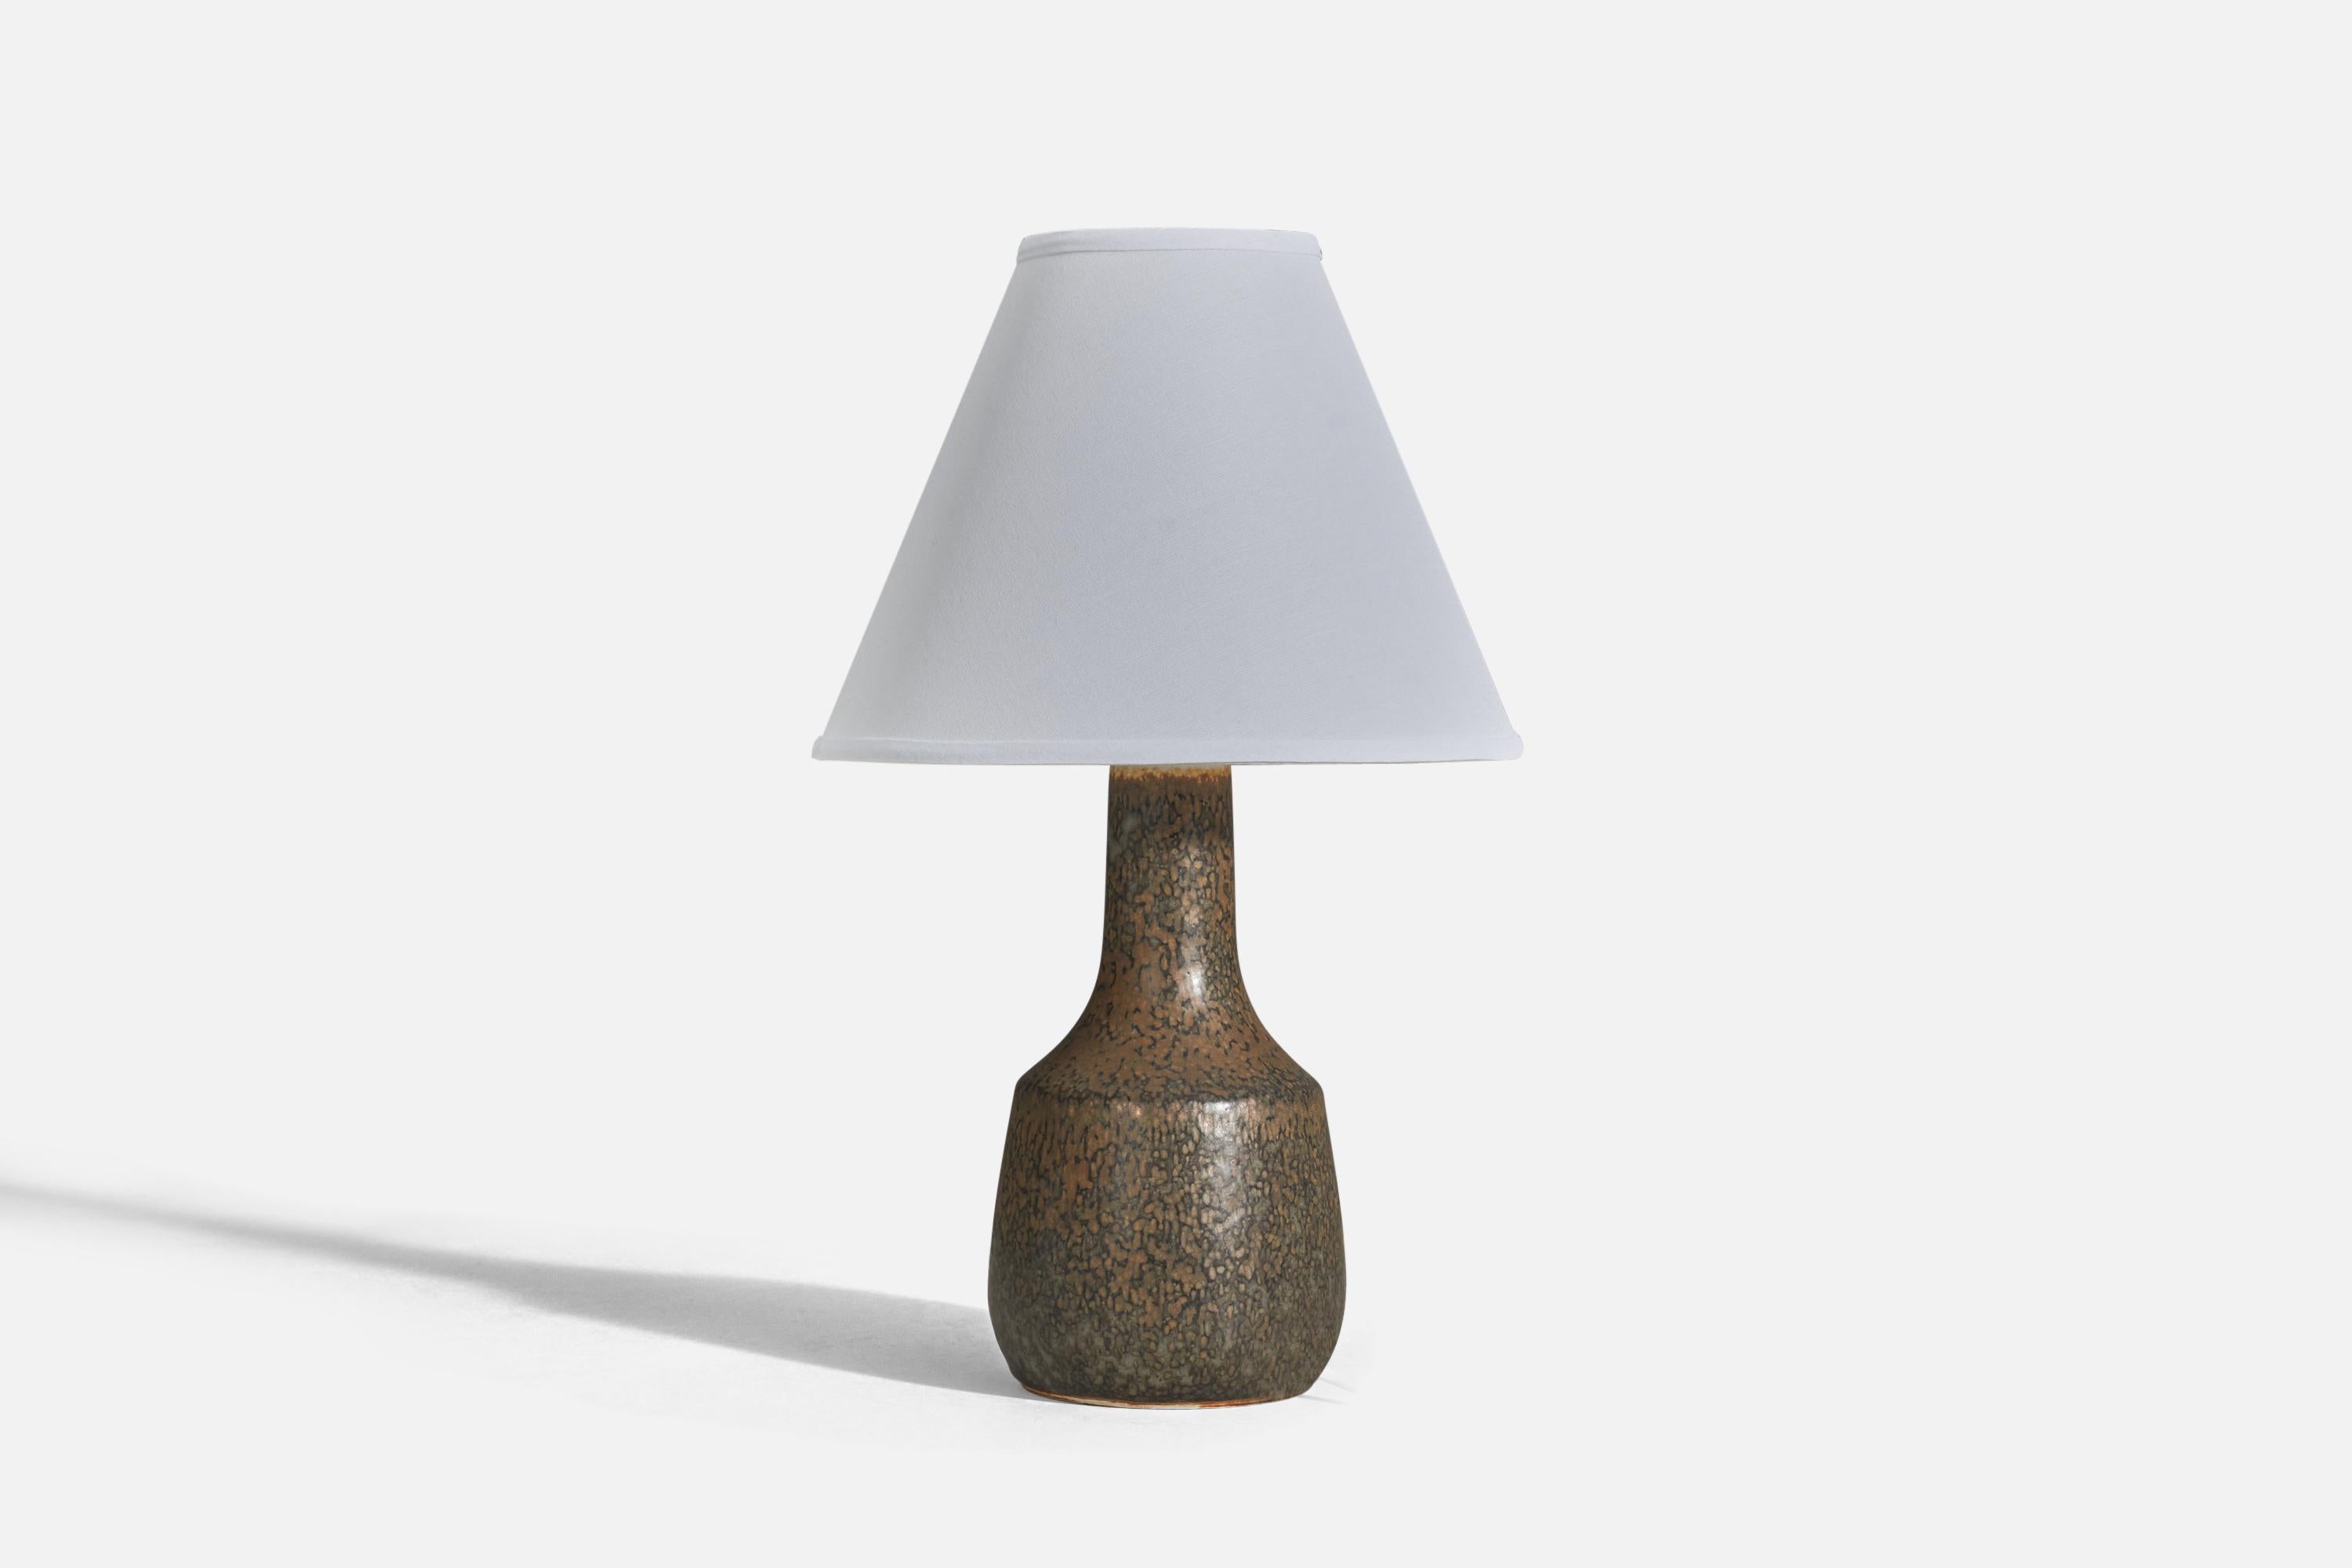 A brown glazed stoneware table lamp designed and produced by Carl-Harry Stålhane, Sweden, 1960s.

Sold without Lampshade
Dimensions of Lamp (inches) : 10.75 x 5.06 x 5.06 (Height x Width x Depth)
Dimensions of Lampshade (inches) : 4 x 10 x 8